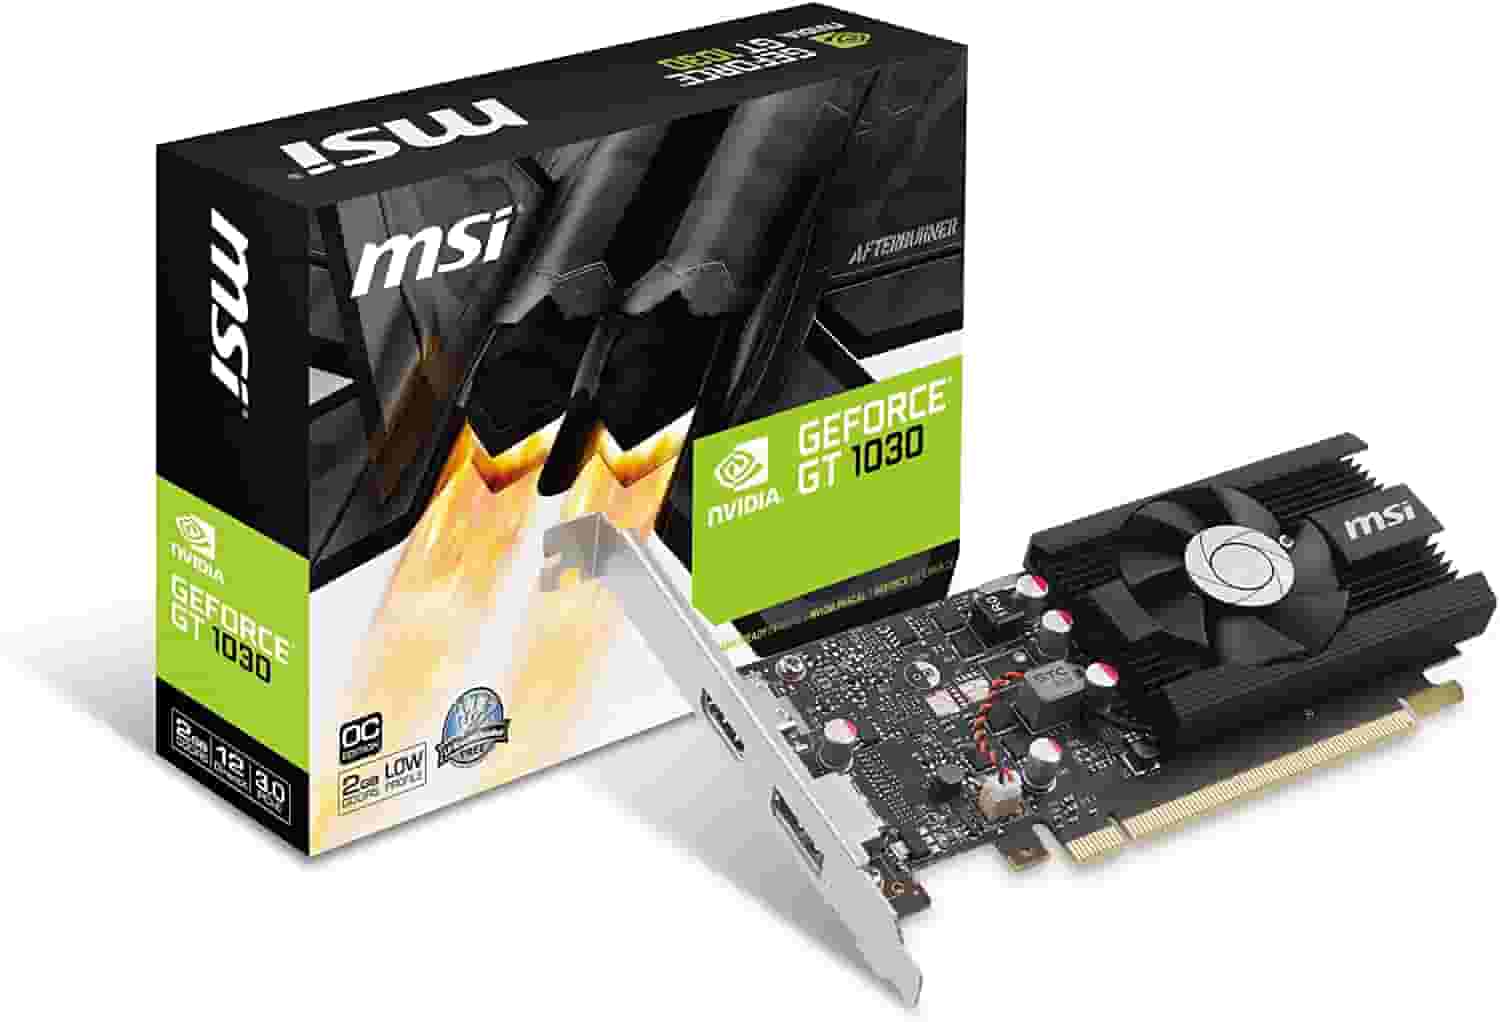 6. MSI GeForce GT 1030 - Cheapest 60 hz graphics card